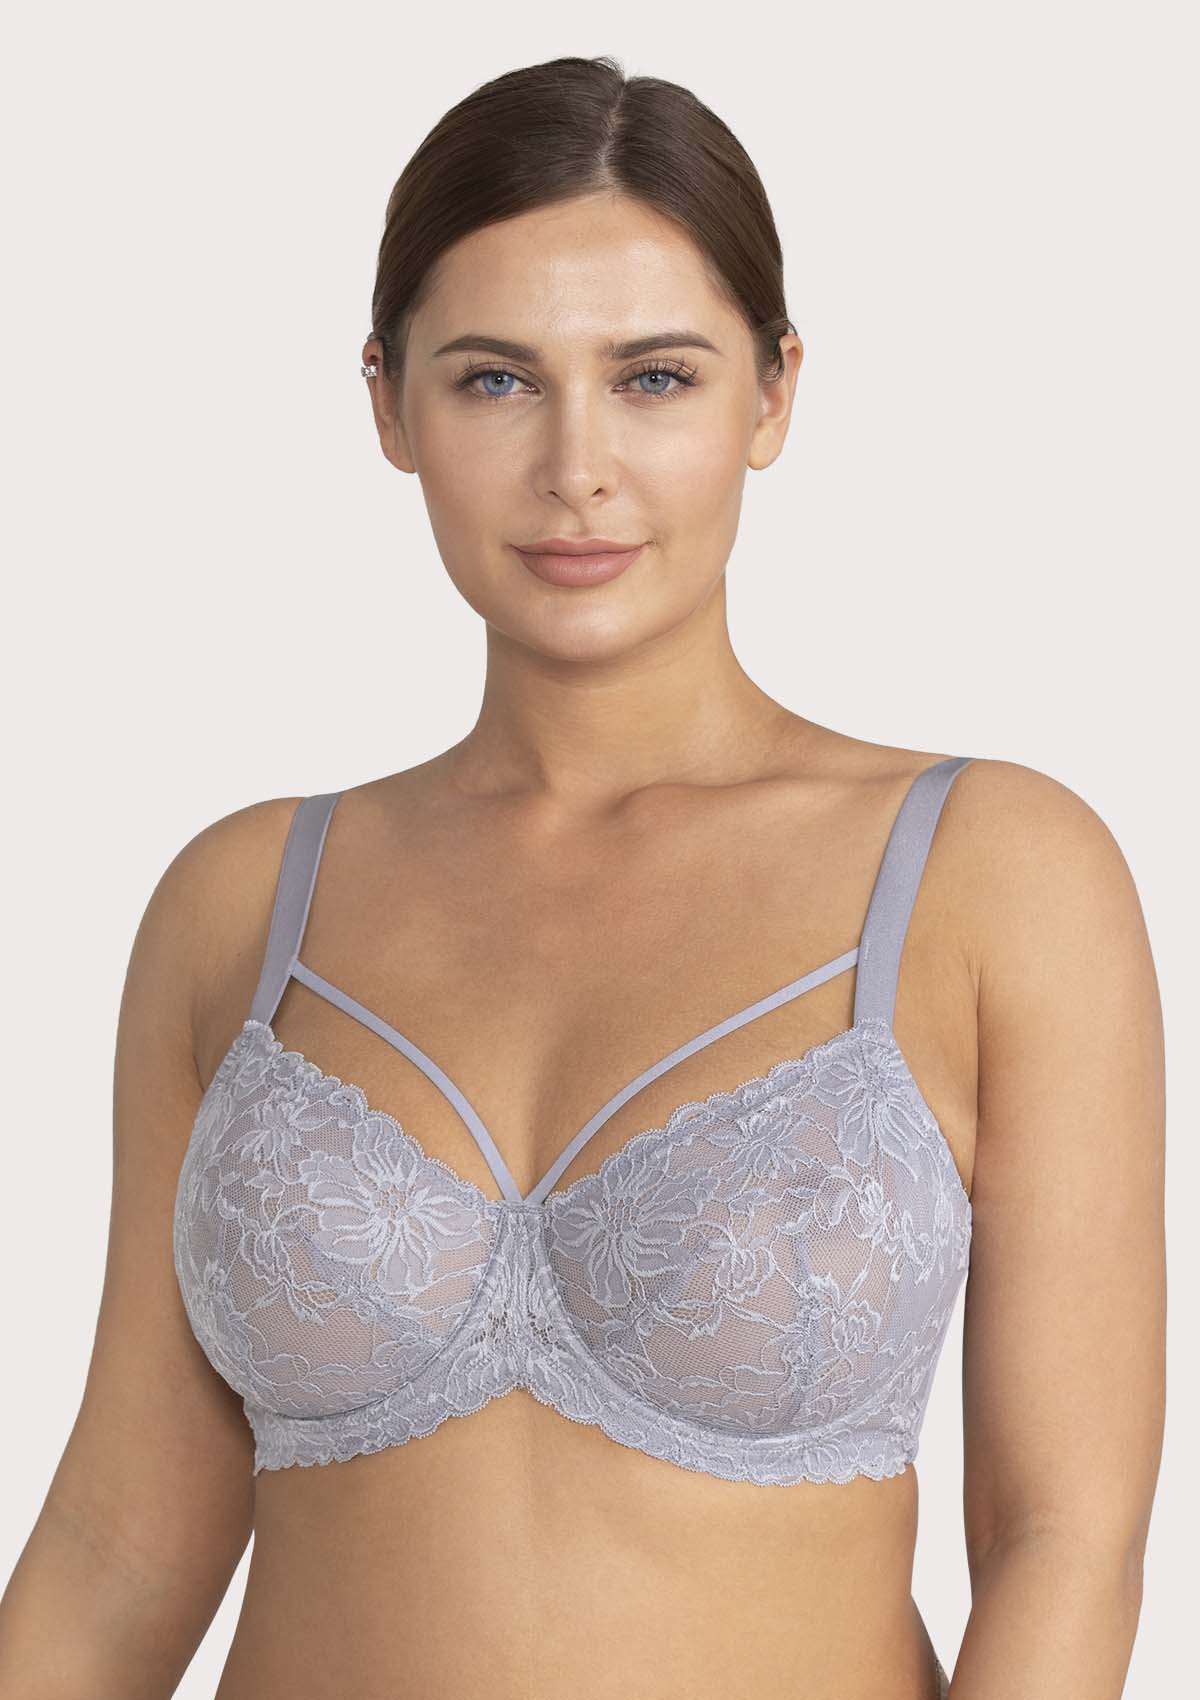 HSIA Pretty In Petals See-Through Lace Bra: Lift And Separate - Purple / 36 / D